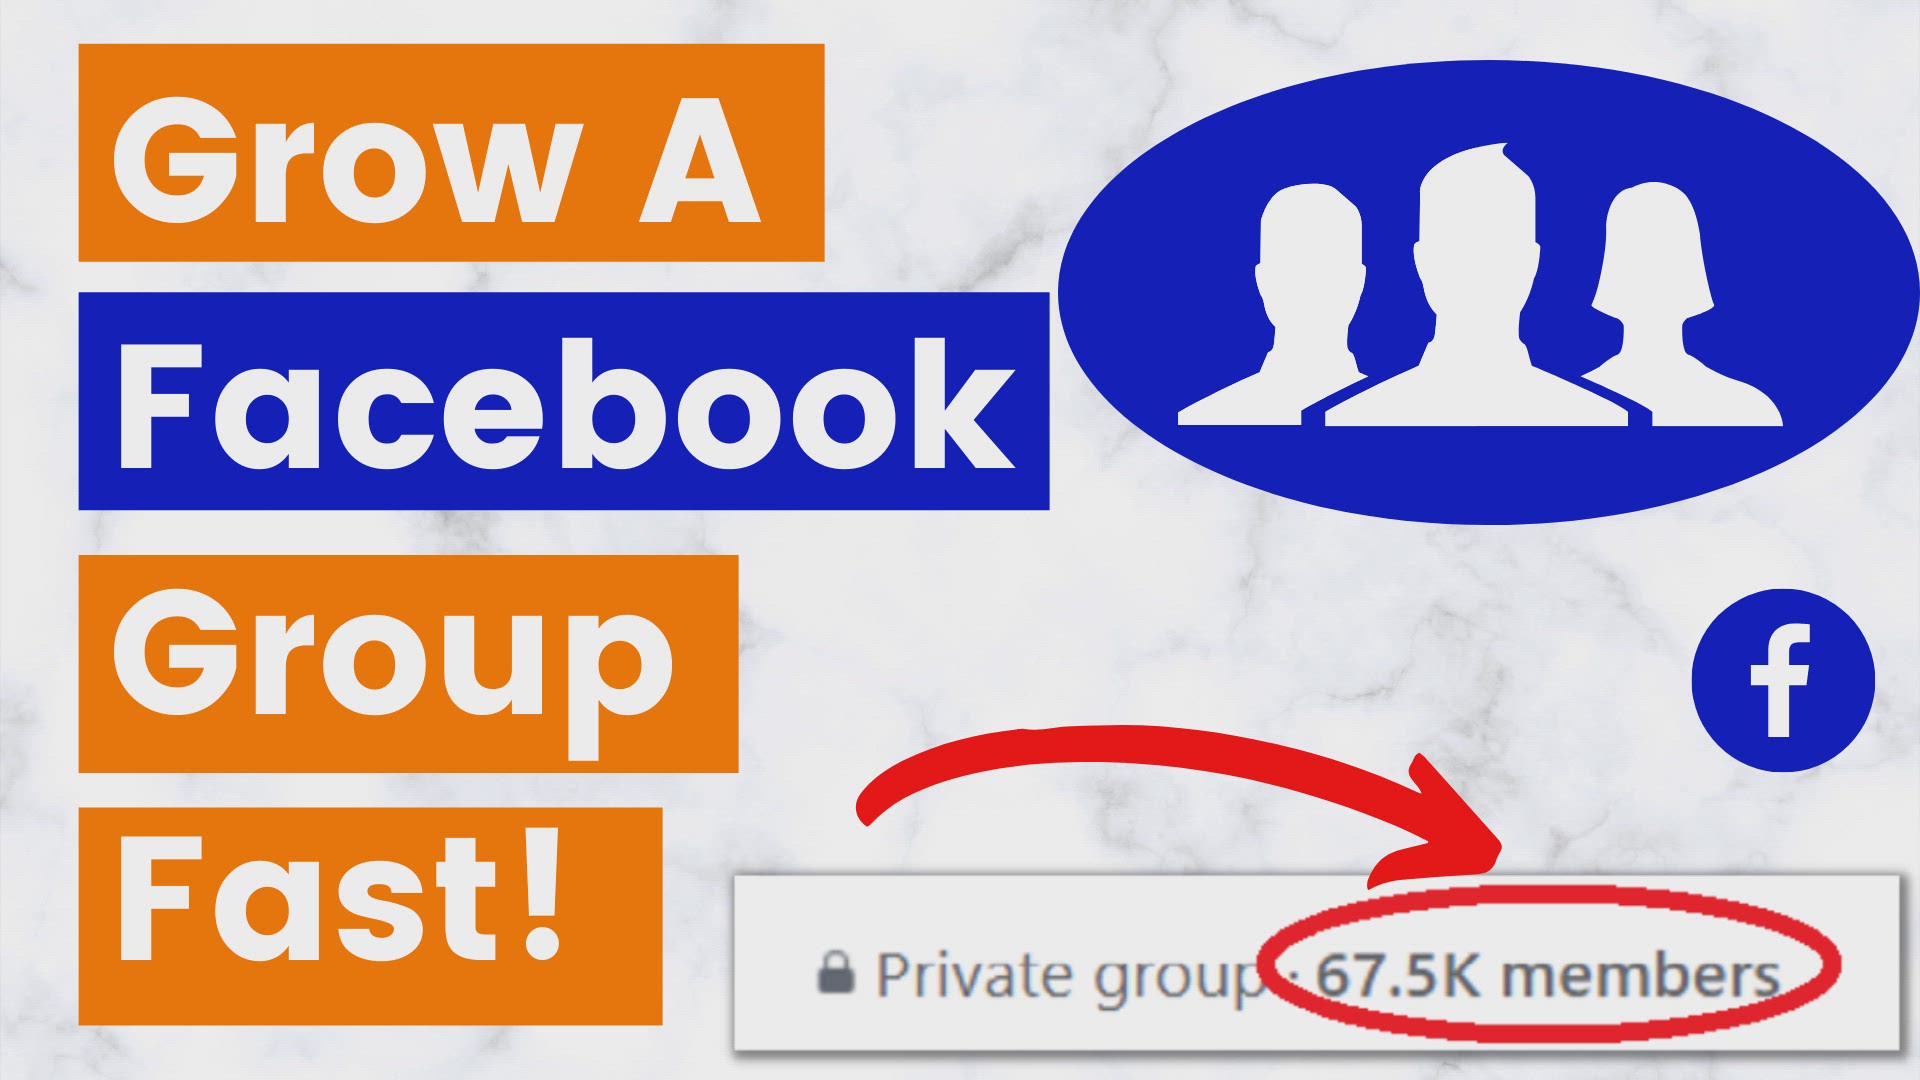 'Video thumbnail for How To Grow A Facebook Group FAST in 2022? Top 10 Tactics To Grow Your Group From Scratch.'